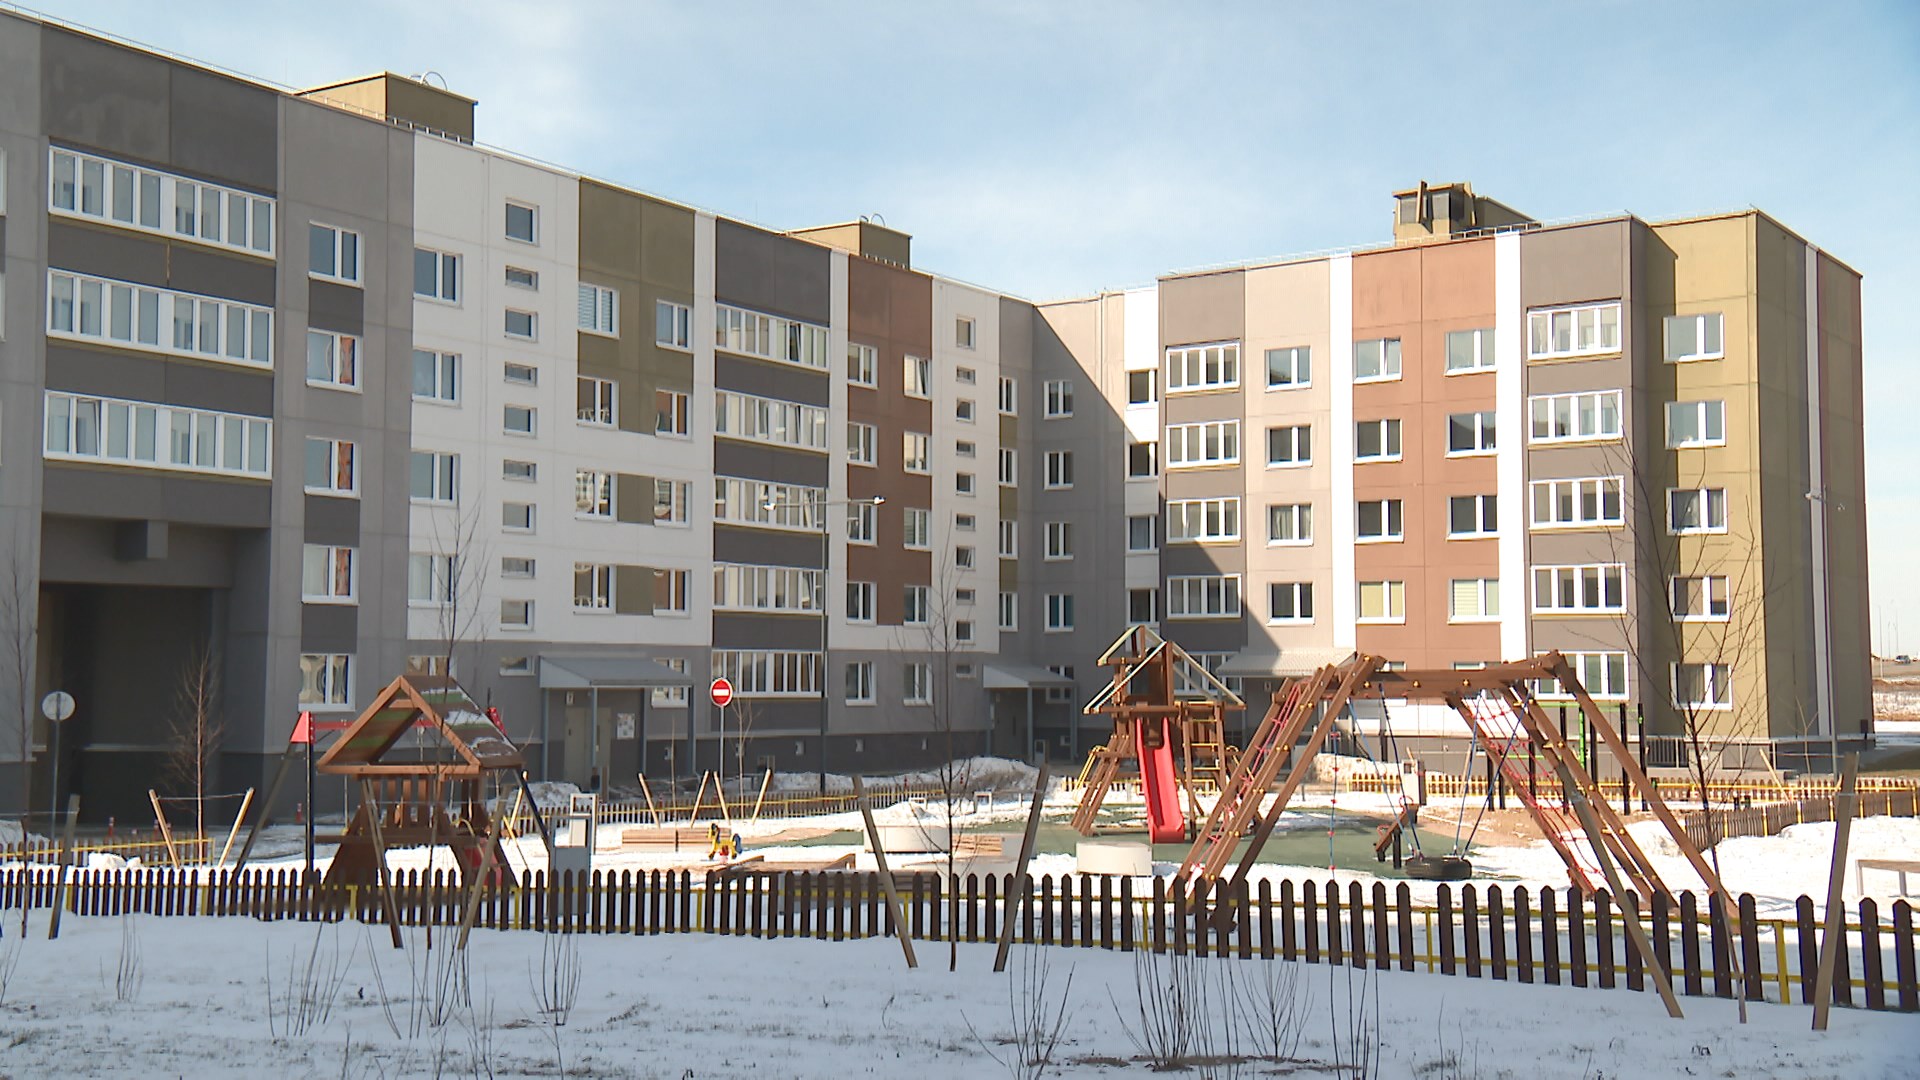 Houses with central electric heating systems being built in Minsk satellite towns